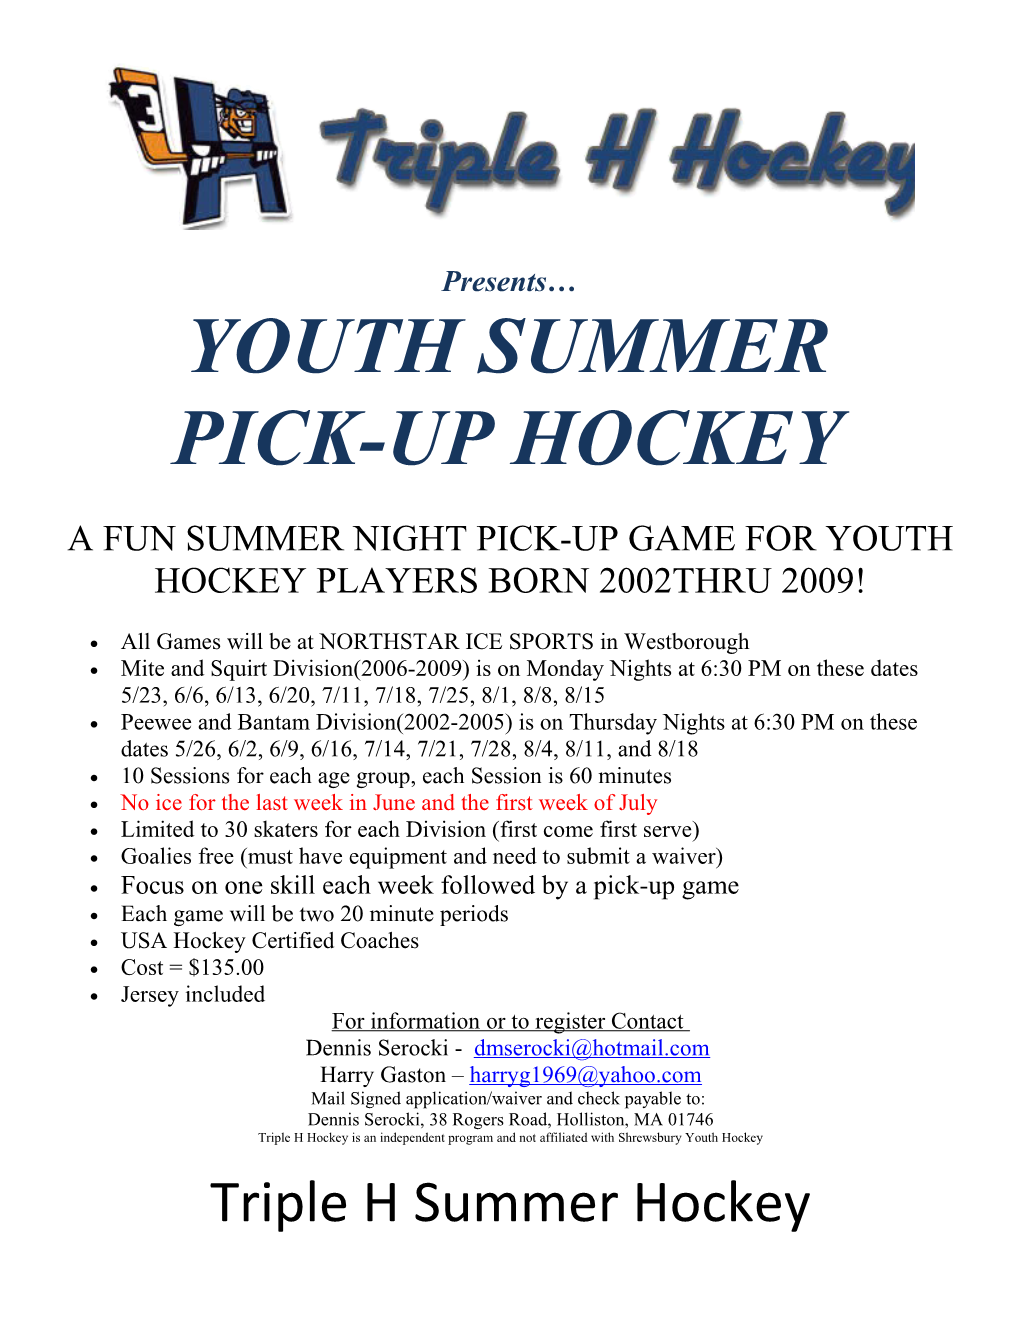 A Fun Summer Night Pick-Up Game for Youth Hockey Players Born 2002Thru 2009!